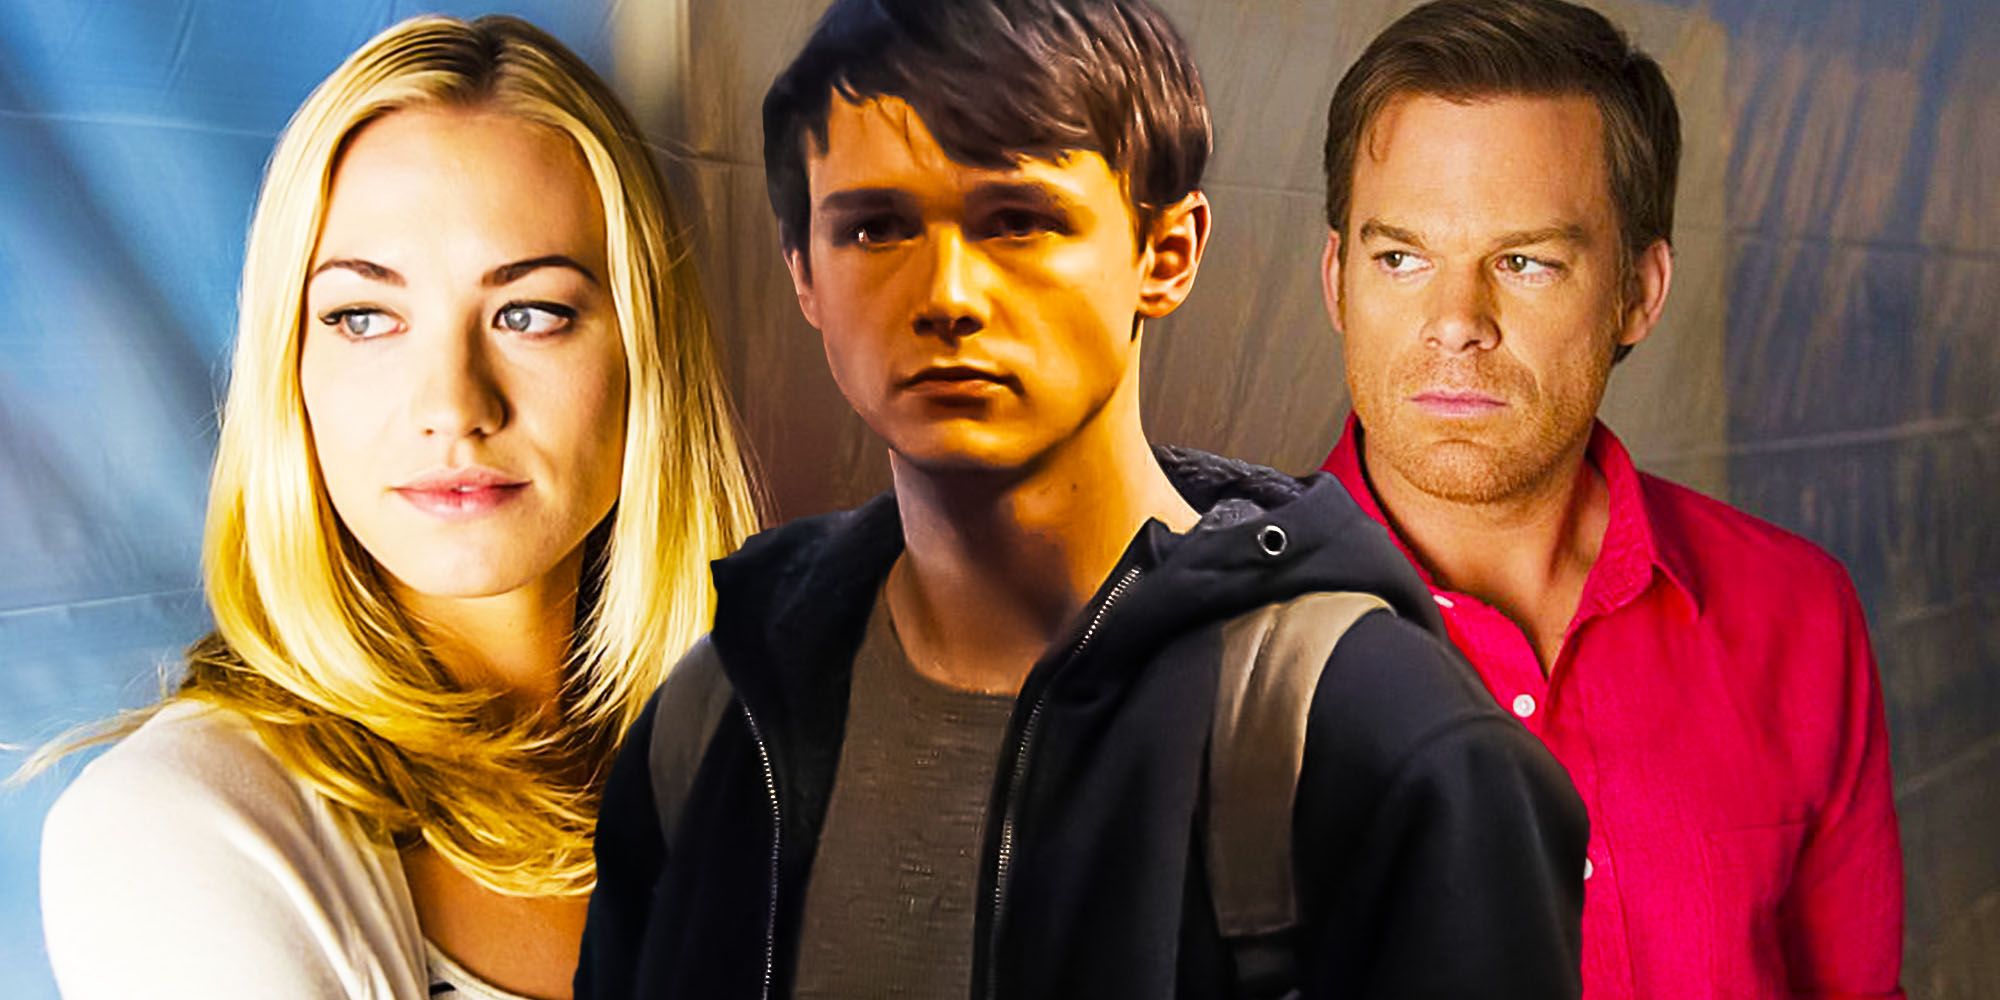 Hannah Caused Harrisons Dark Passenger In New Blood (& Not Dexter) – Theory Explained